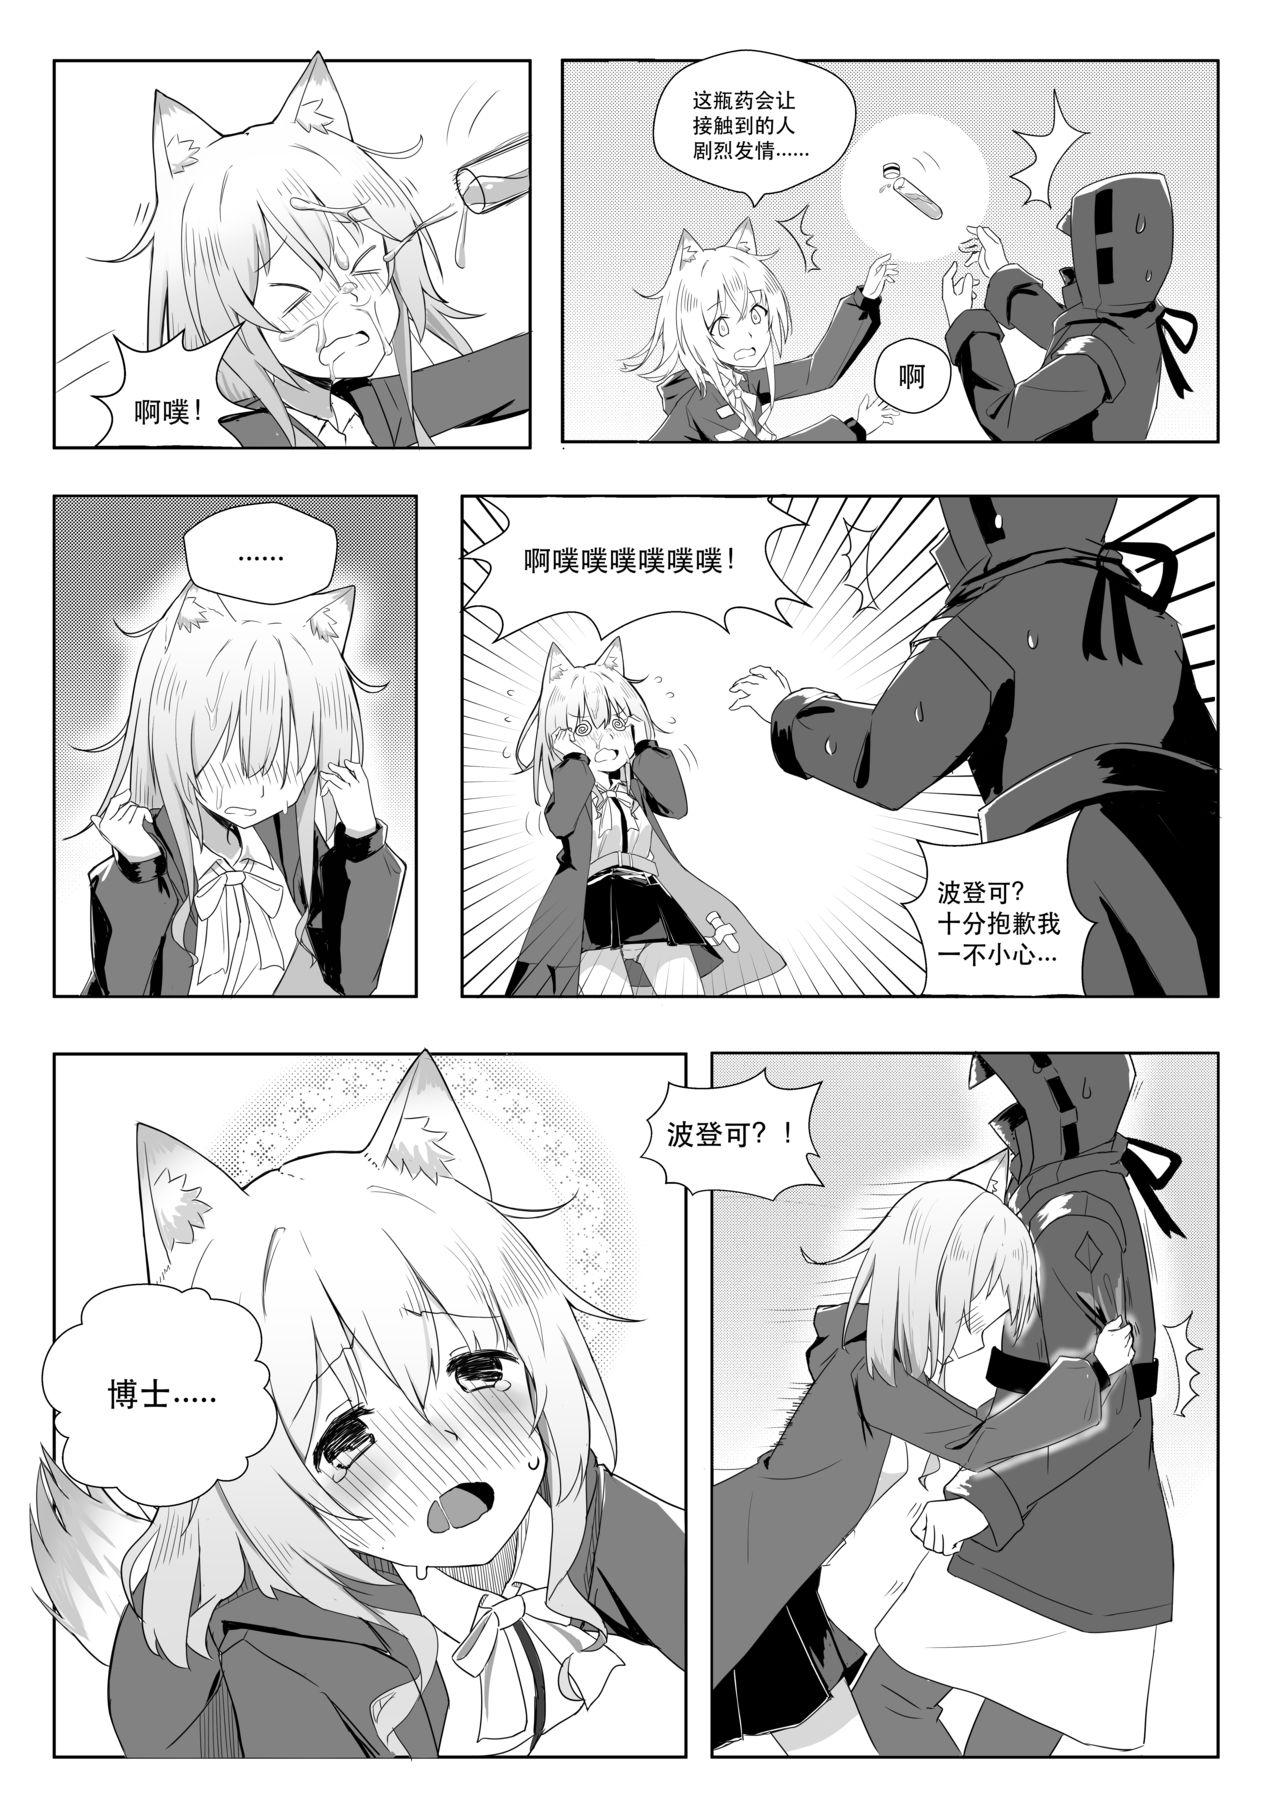 Adult 发情的狗狗波登可 - Arknights Gay Hunks - Page 4